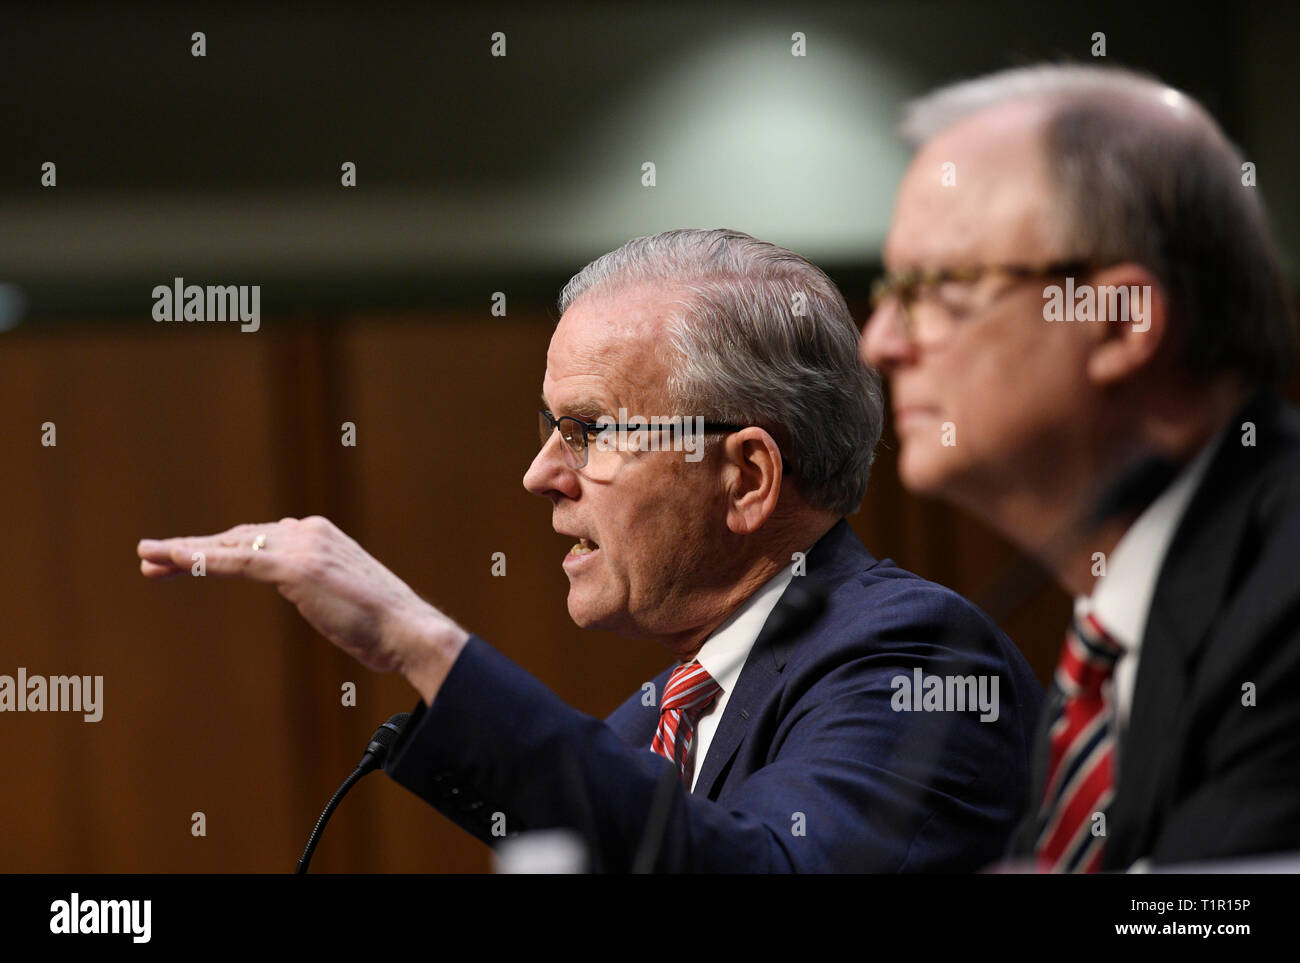 Washington, USA. 27th Mar, 2019. Daniel Elwell (L), acting administrator of U.S. Federal Aviation Administration (FAA), speaks at a Senate Commerce Committee hearing on airline safety in Washington, DC, the United States, on March 27, 2019. The U.S. Federal Aviation Administration (FAA) on Wednesday vowed to revamp its air safety oversight after two deadly crashes involving Boeing 737 Max jets in less than five months pointed to possible lapses in the aircraft approval process. Credit: Liu Jie/Xinhua/Alamy Live News Stock Photo